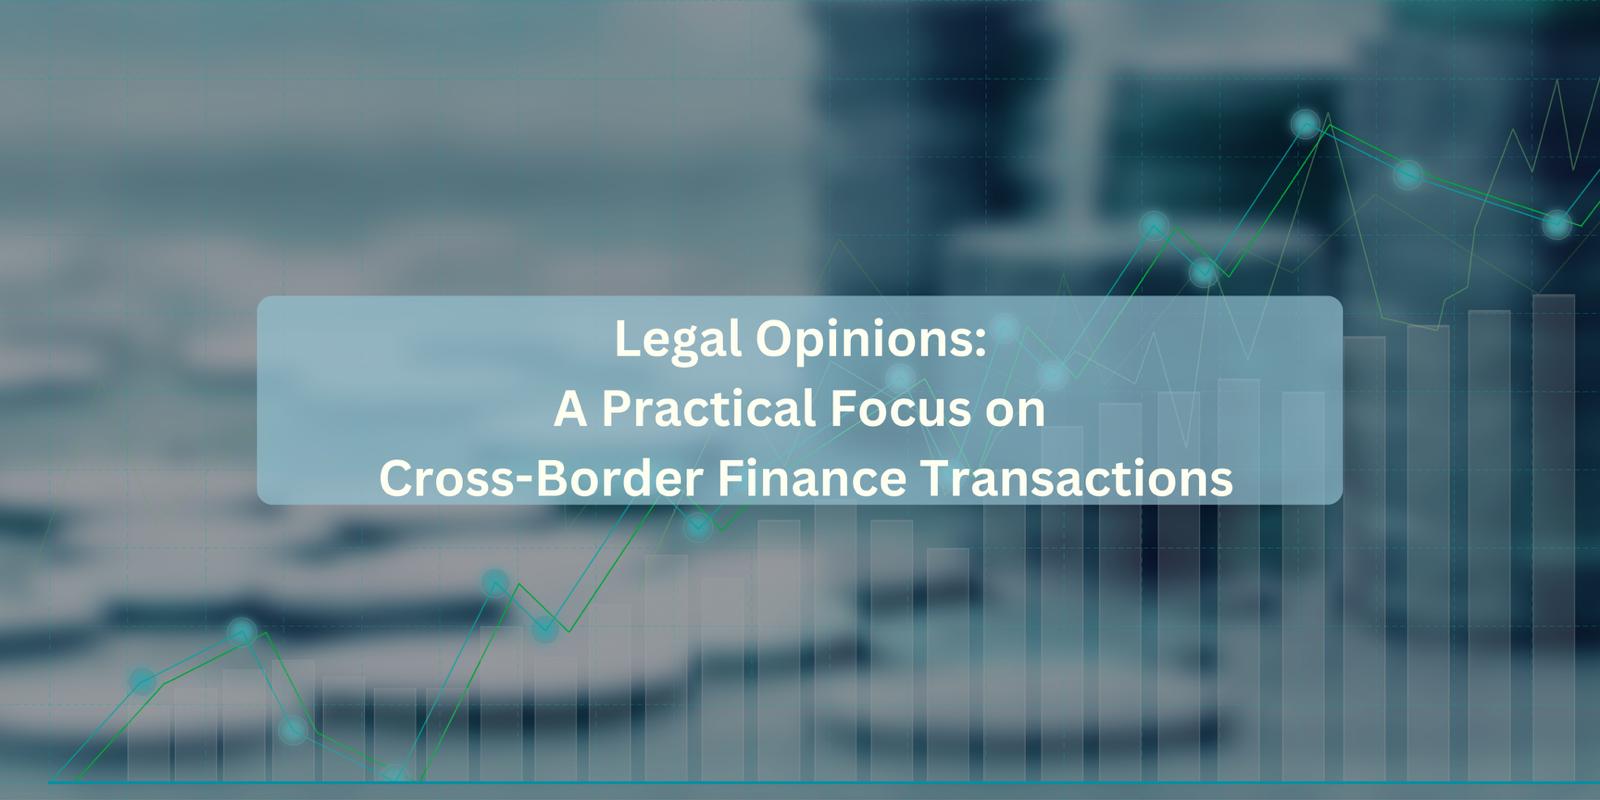 Legal Opinions: A Practical Focus on Cross-Border Finance Transactions